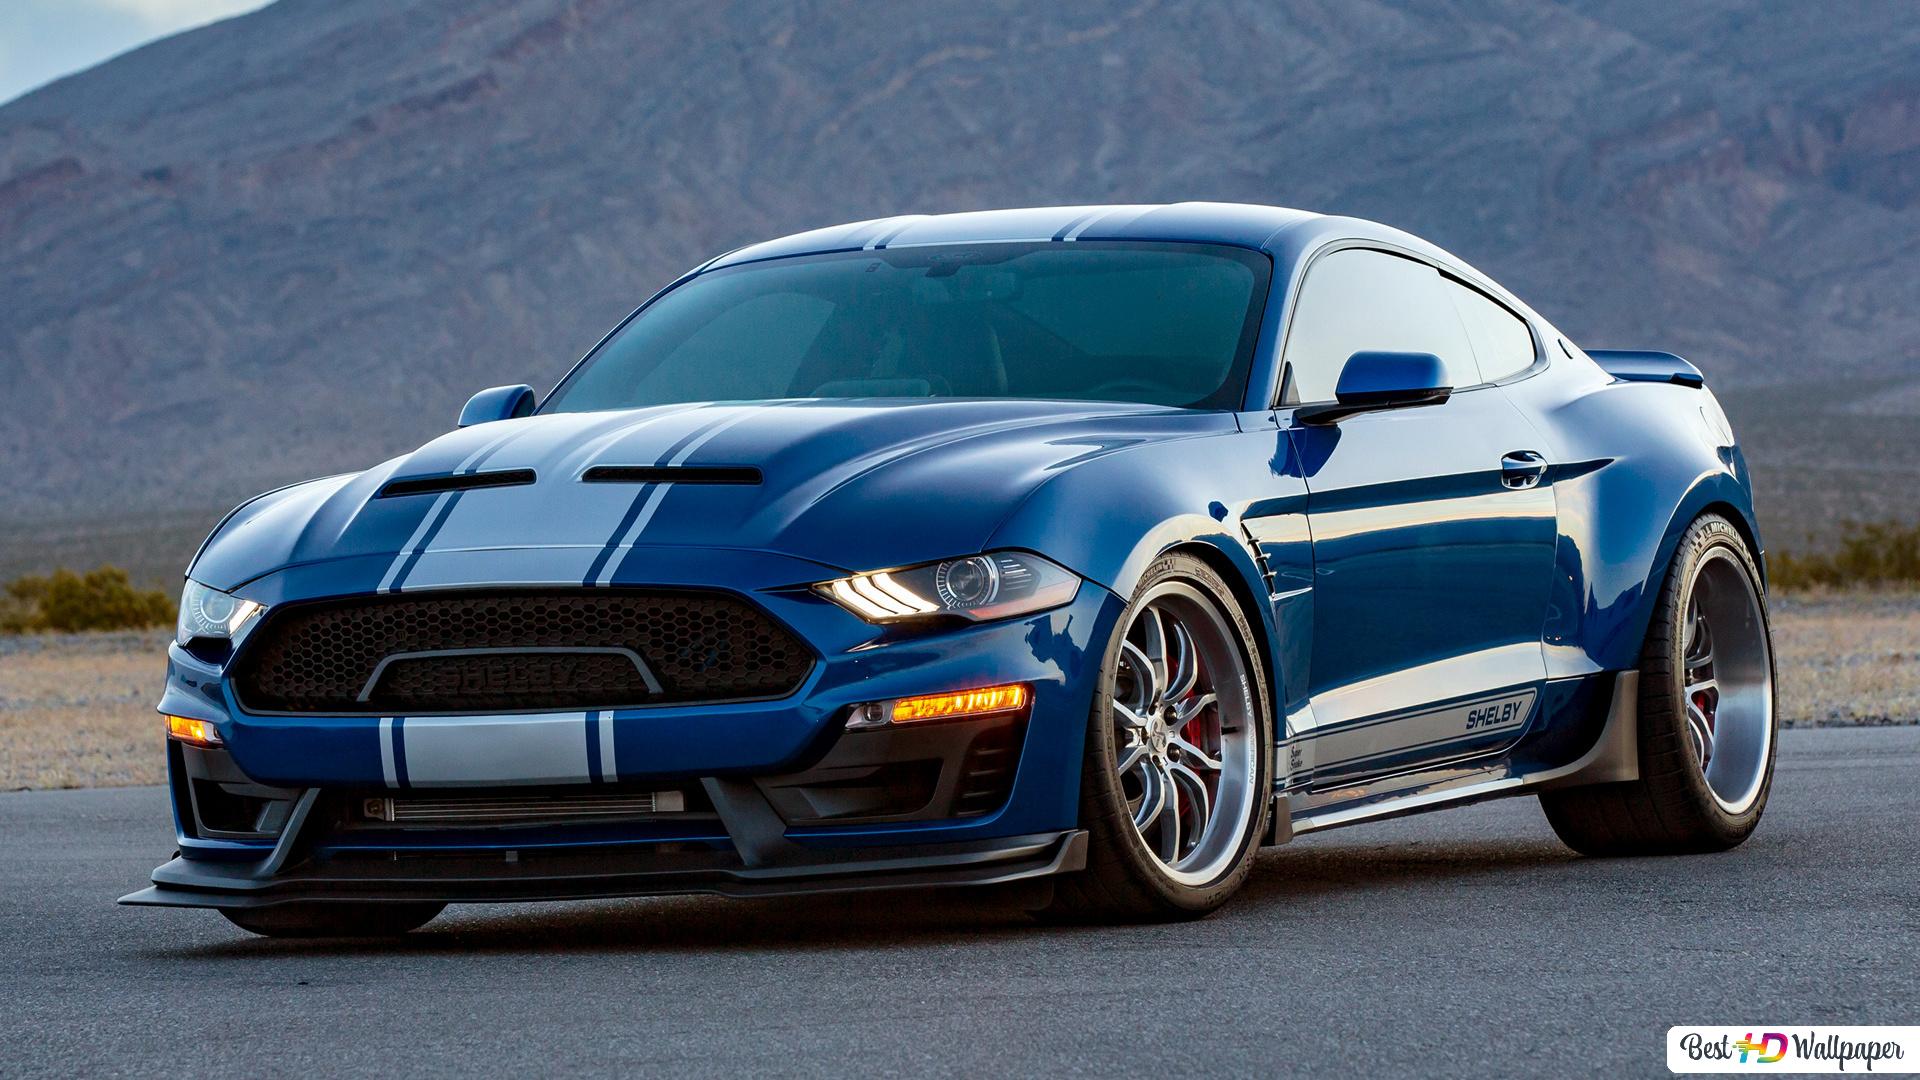 Ford Mustang Shelby Super Snake Widebody 2018 01 HD wallpaper download